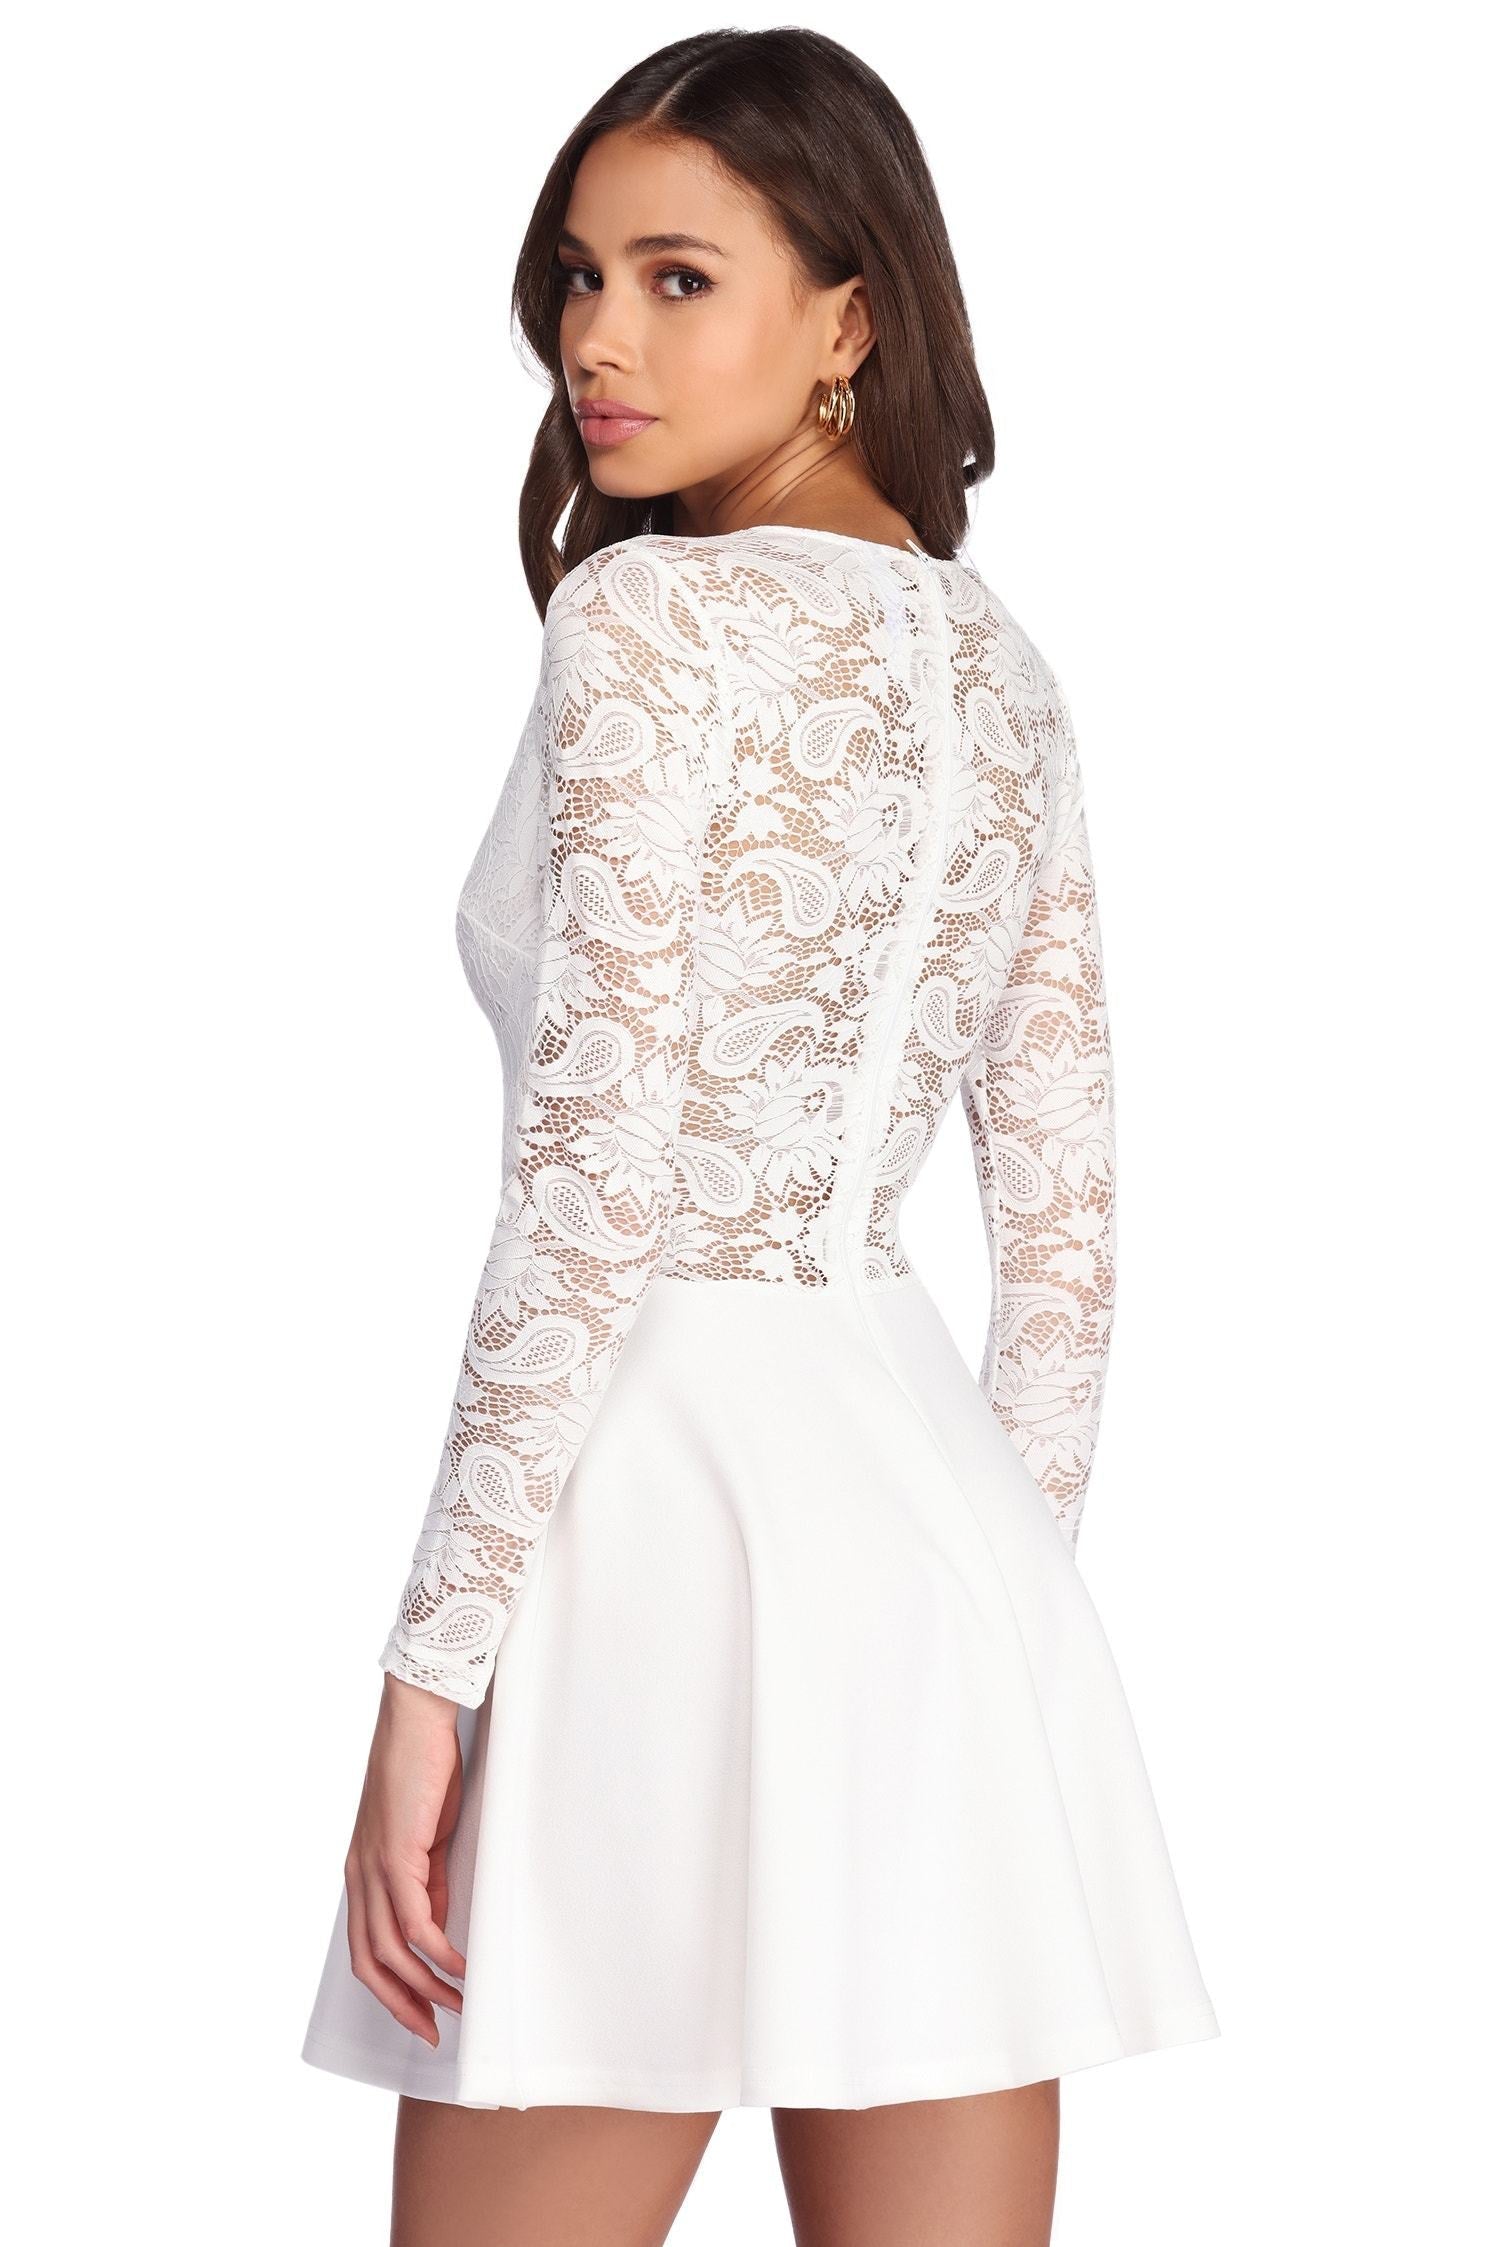 Lace Obsession Skater Dress Ins Street